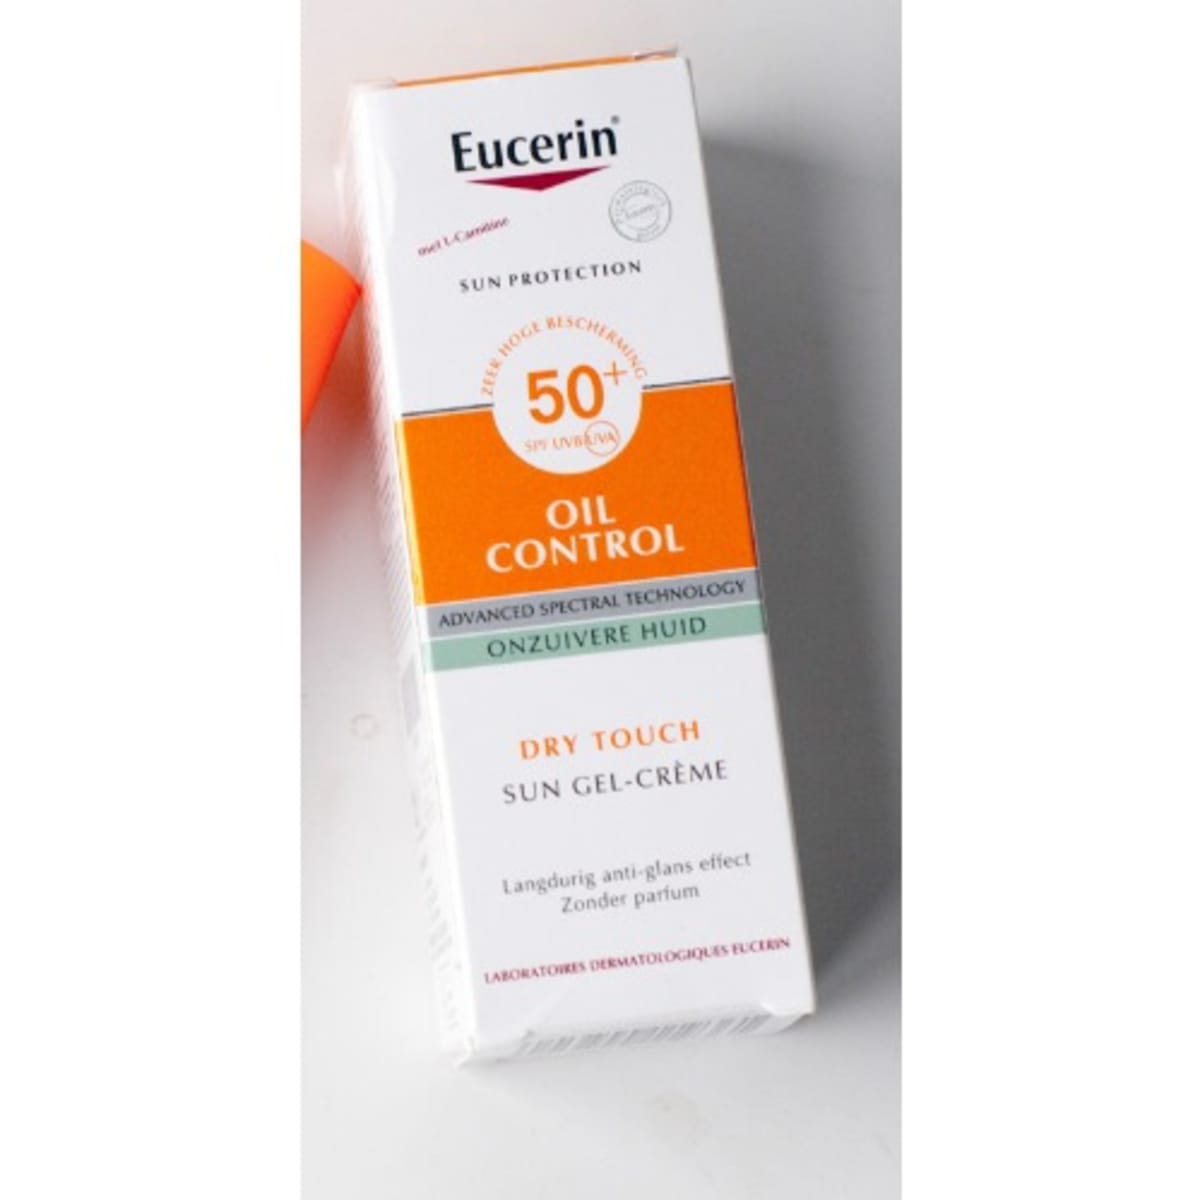 Eucerin Sunscreen Sun Dry Touch Oil Control Face Gel Cream SPF50 50 ml.  Traking for sale online